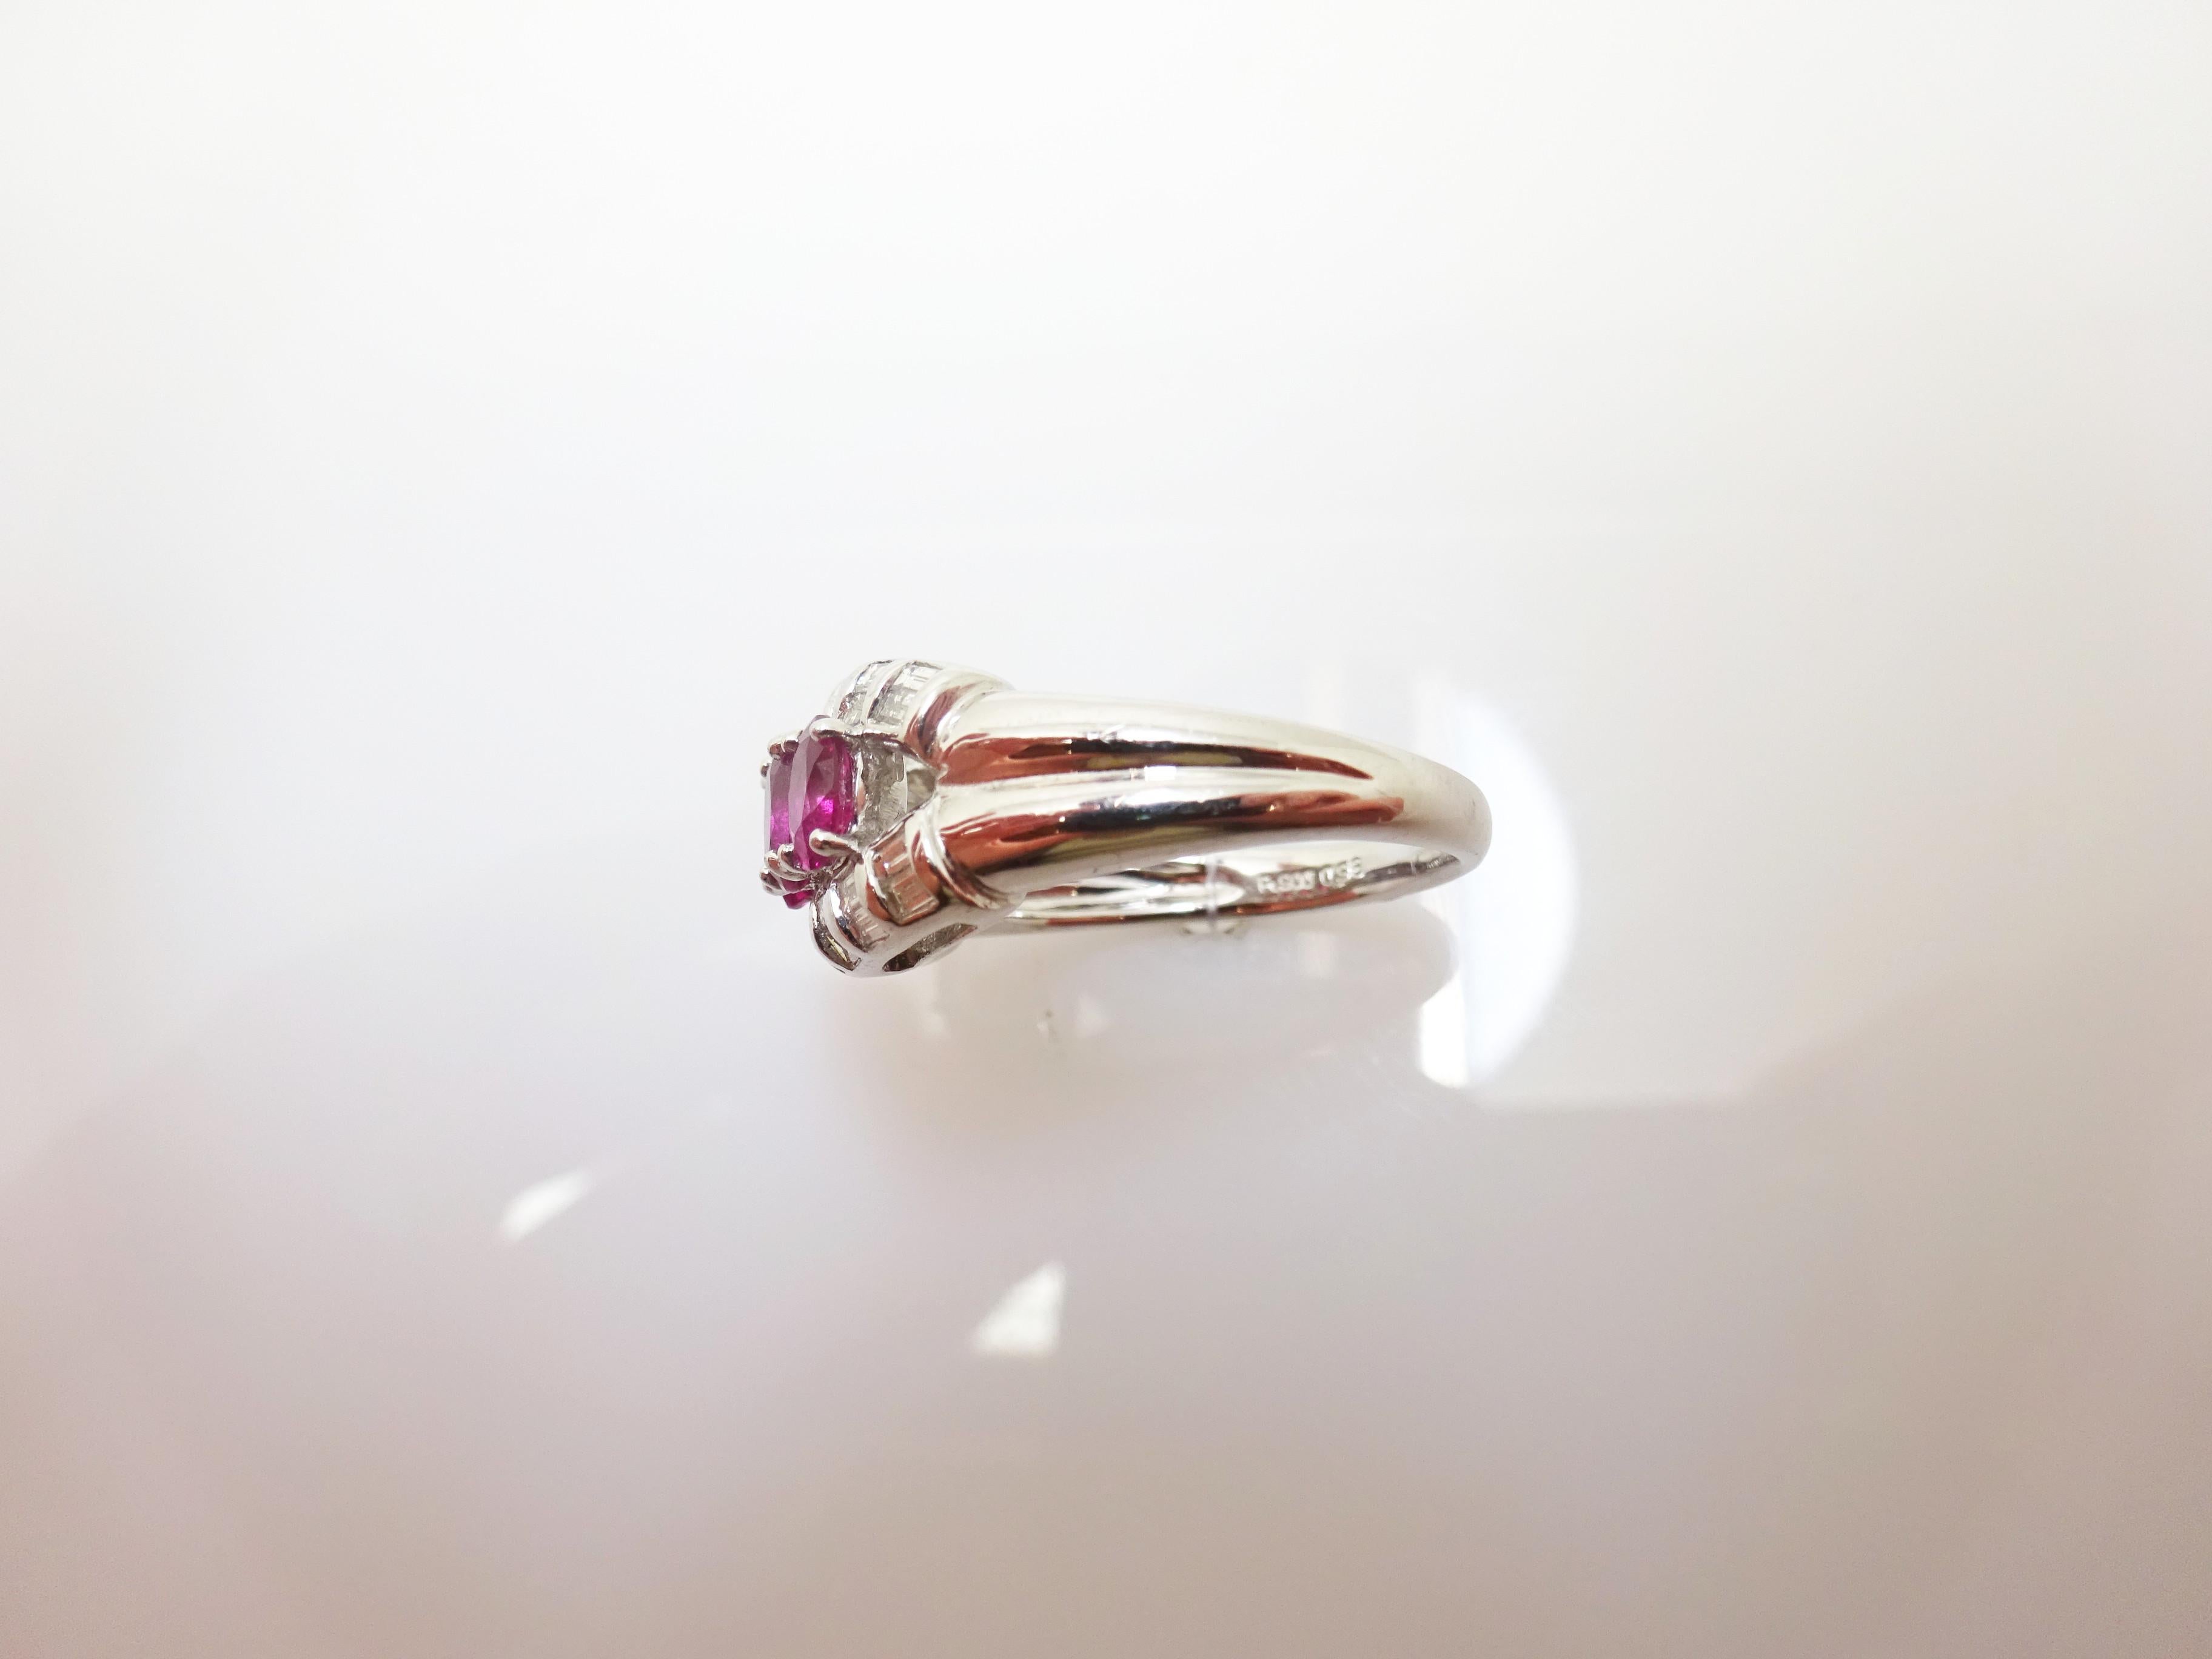 Fine Platinum Genuine Natural Ruby and Diamond Ring (#J3259)

Fine platinum ruby and diamond ring featuring three beautiful oval pinkish red earth mined rubies. The rubies have a total weight of .98cts and measure about 4.8mm x 3.4mm. The rubies are